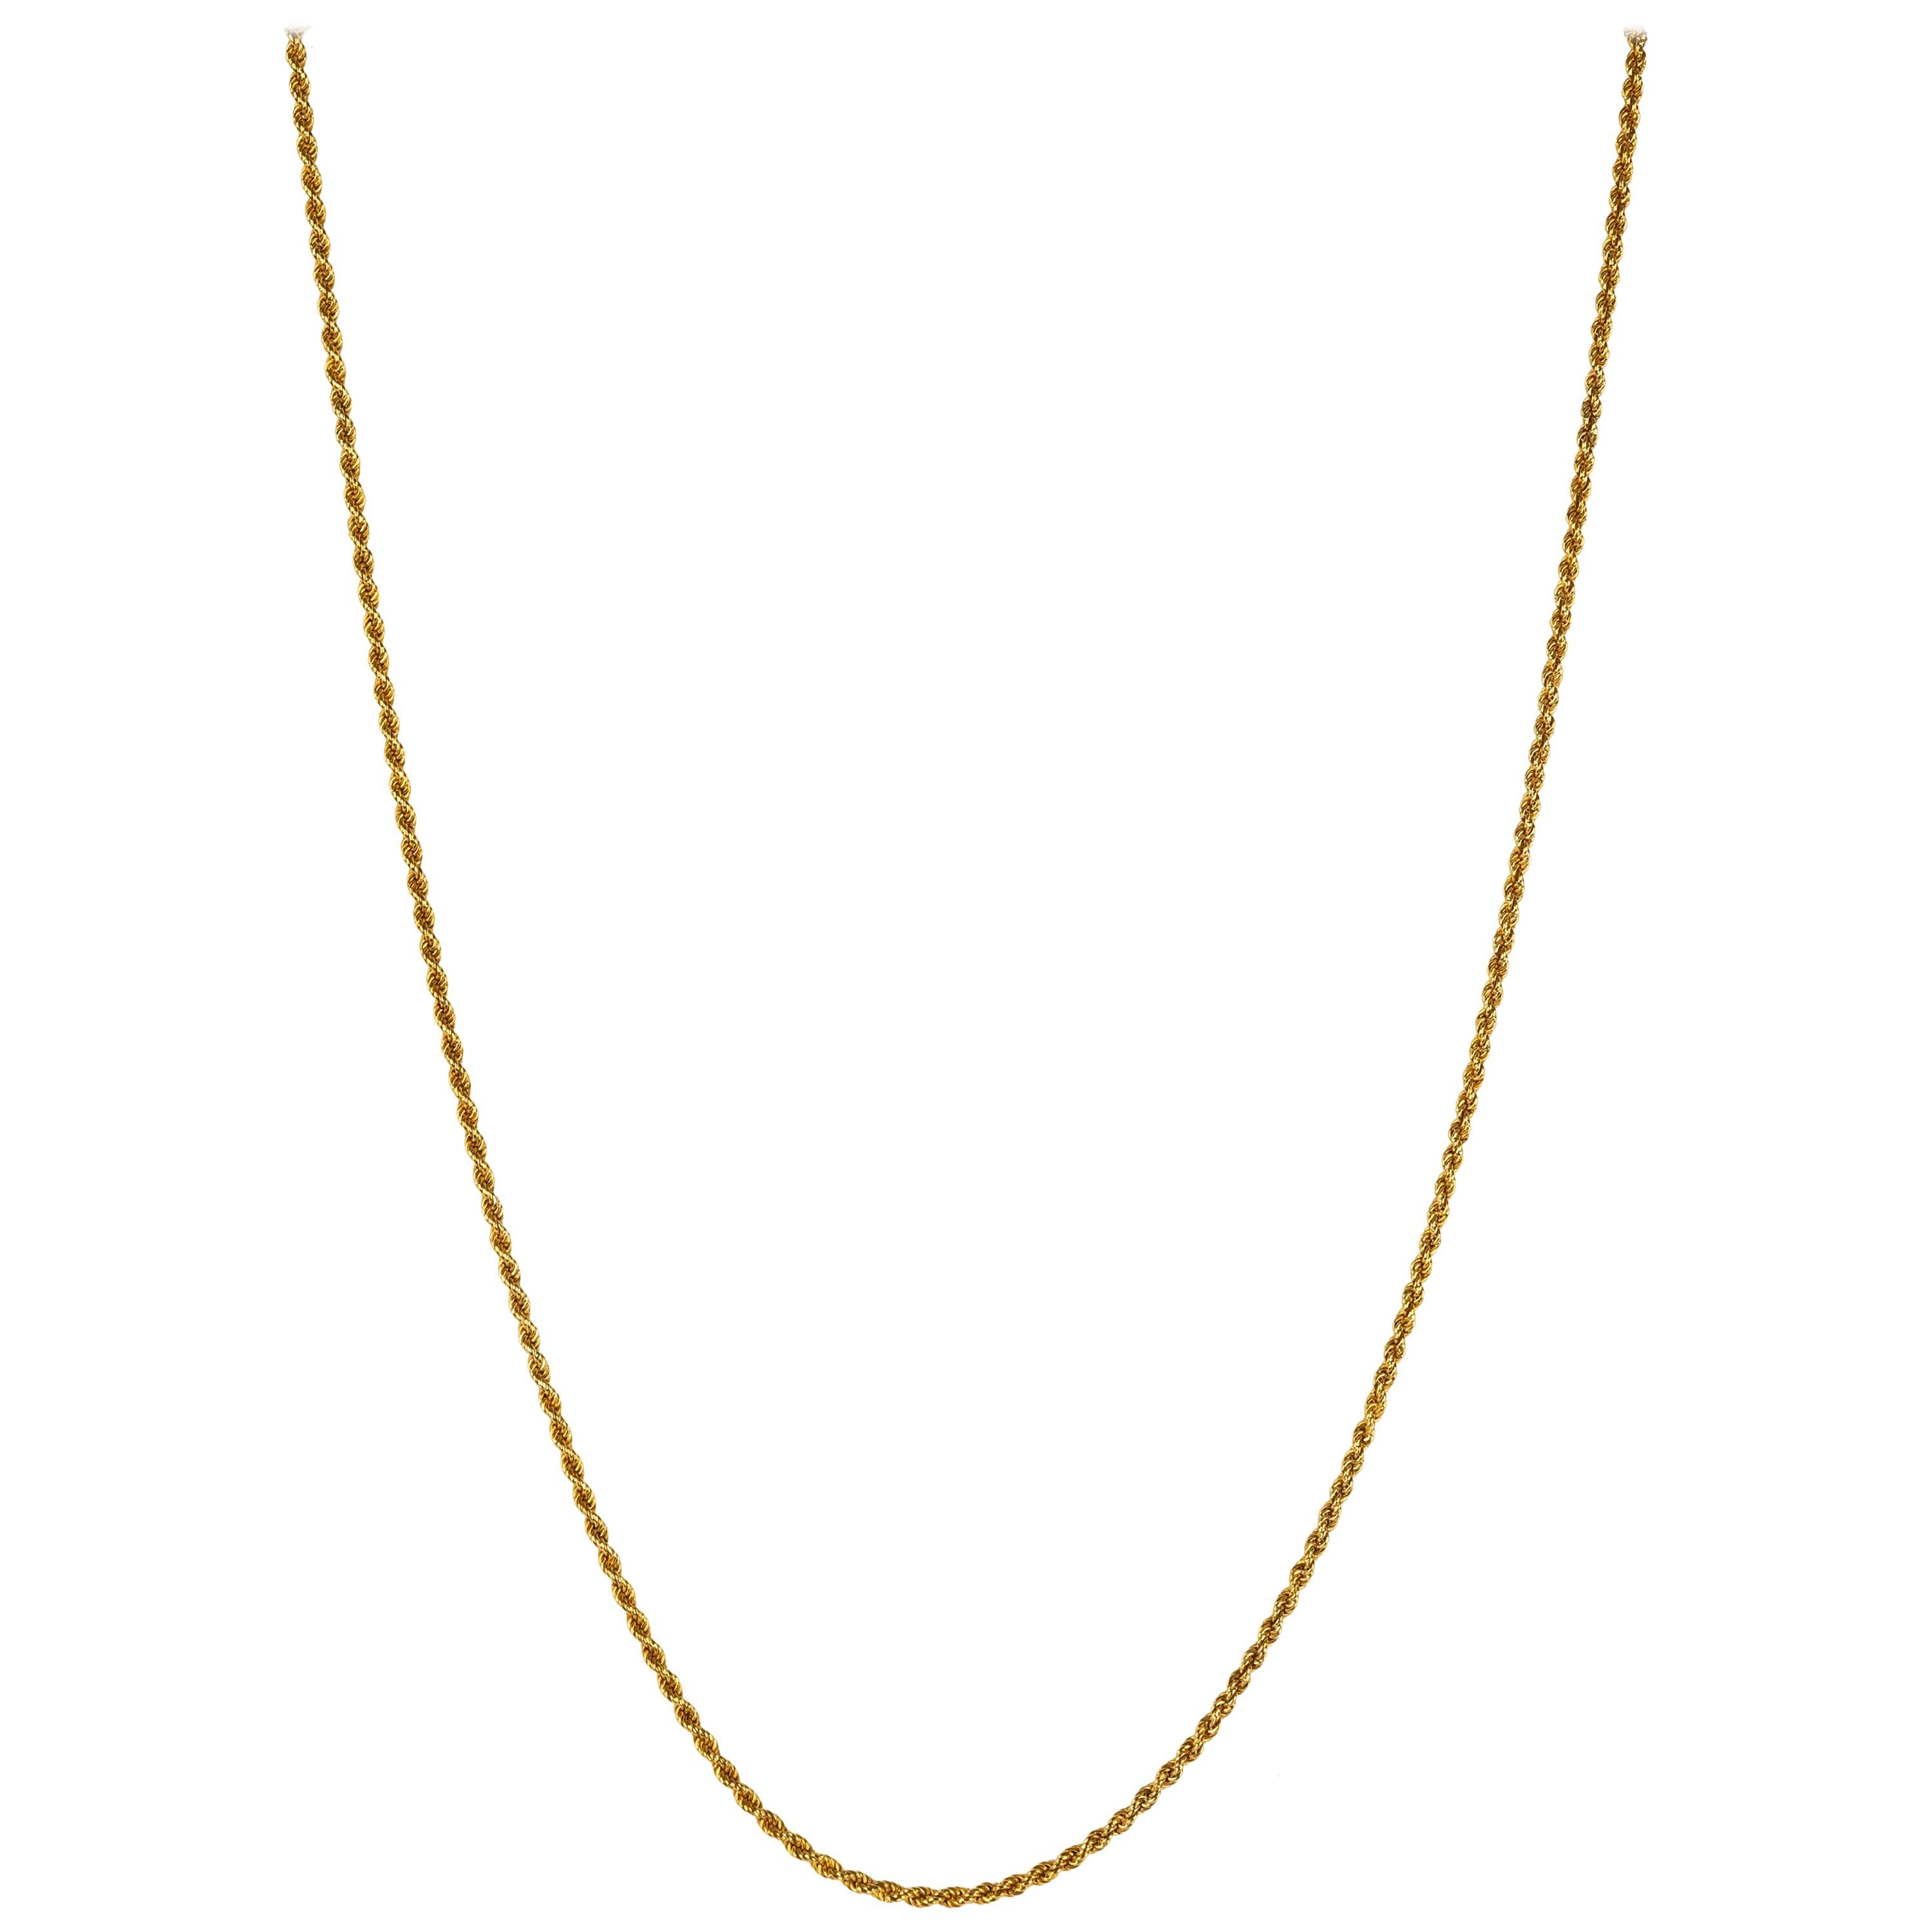 From the Romanov era, period of Tsar Nicholas II, a rare Russian 14k yellow gold rope chain from the ancient capital of Moscow. 

Moscow, 1908-17.

25 in. (63.5 cm) long including clasp.
